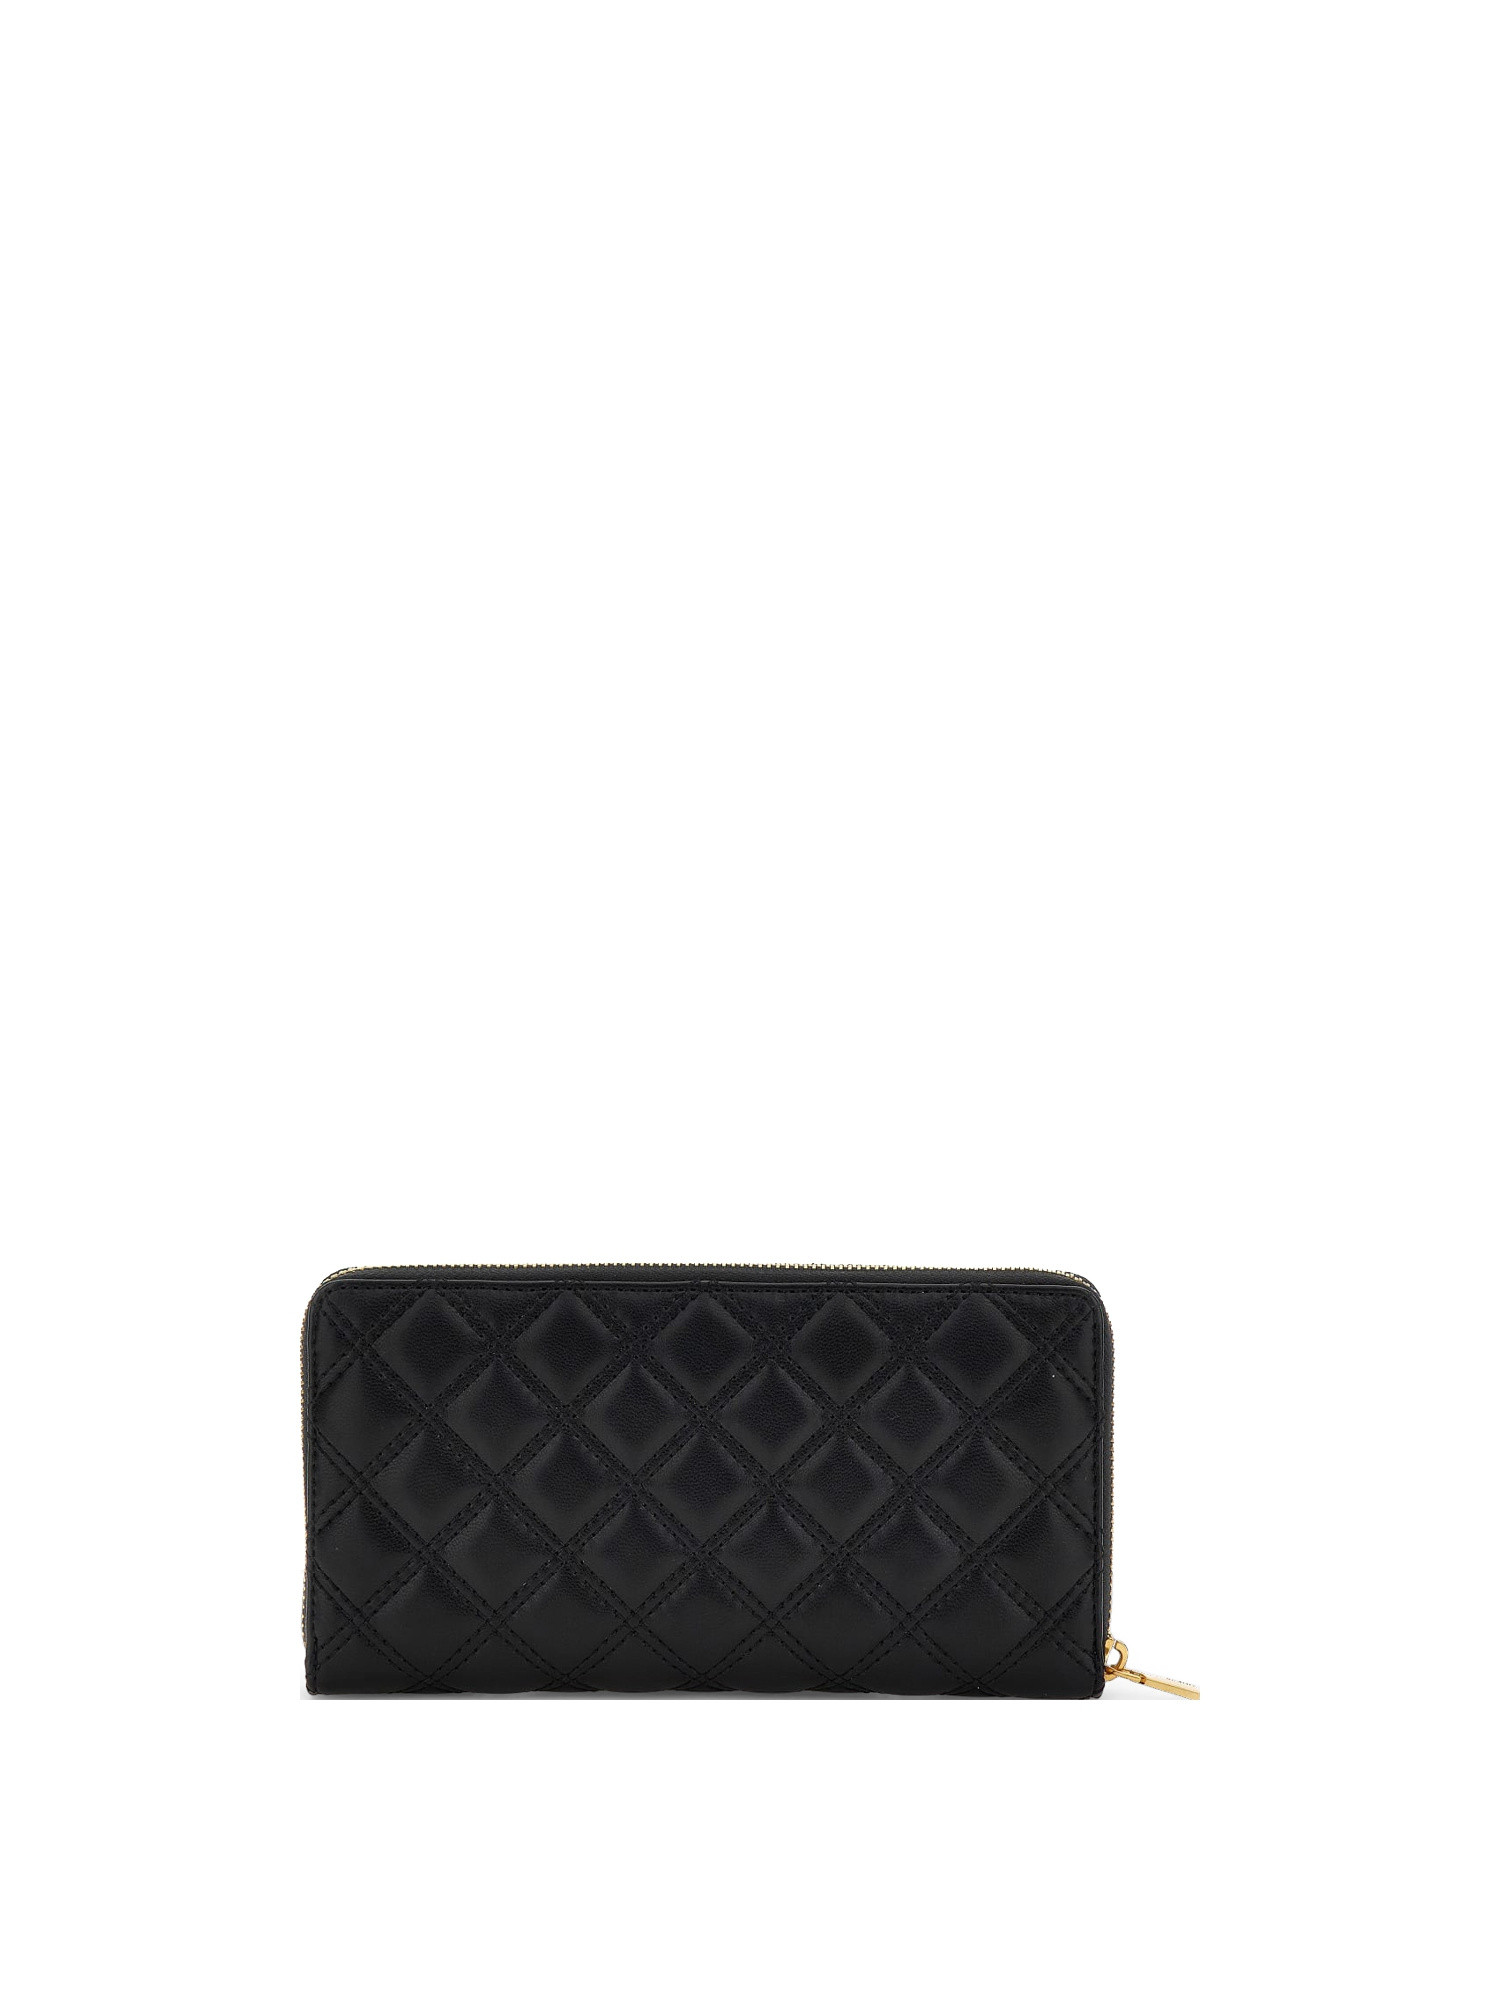 Guess - Giully maxi wallet, Black, large image number 1